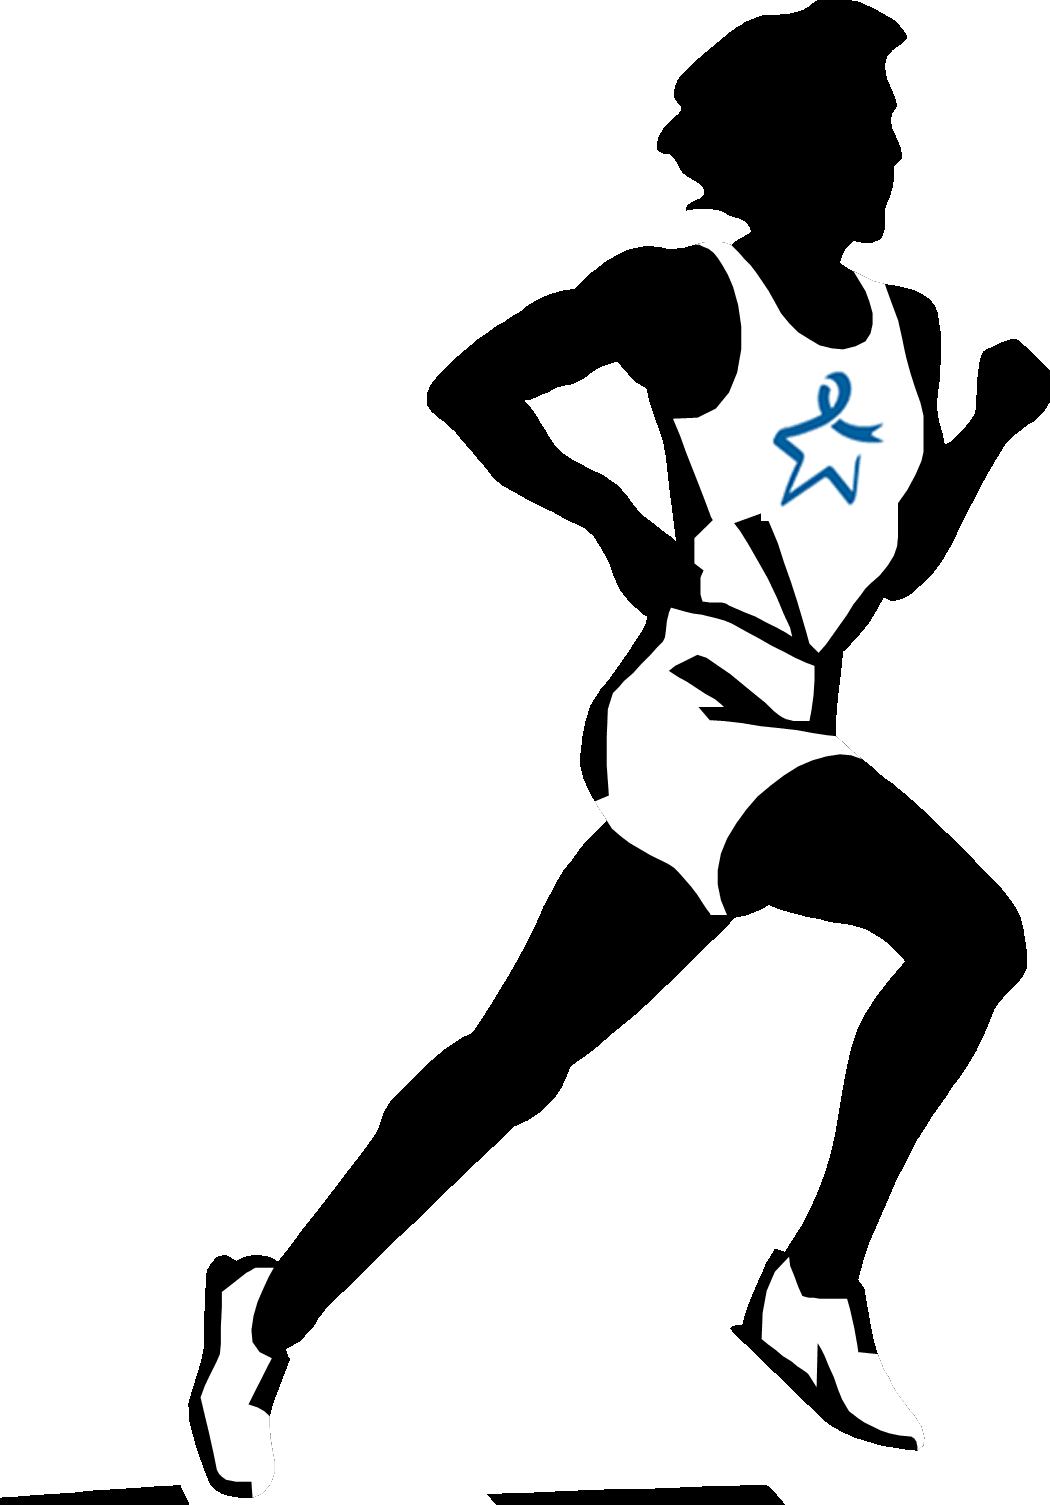 Free clip art of person running clipart sports